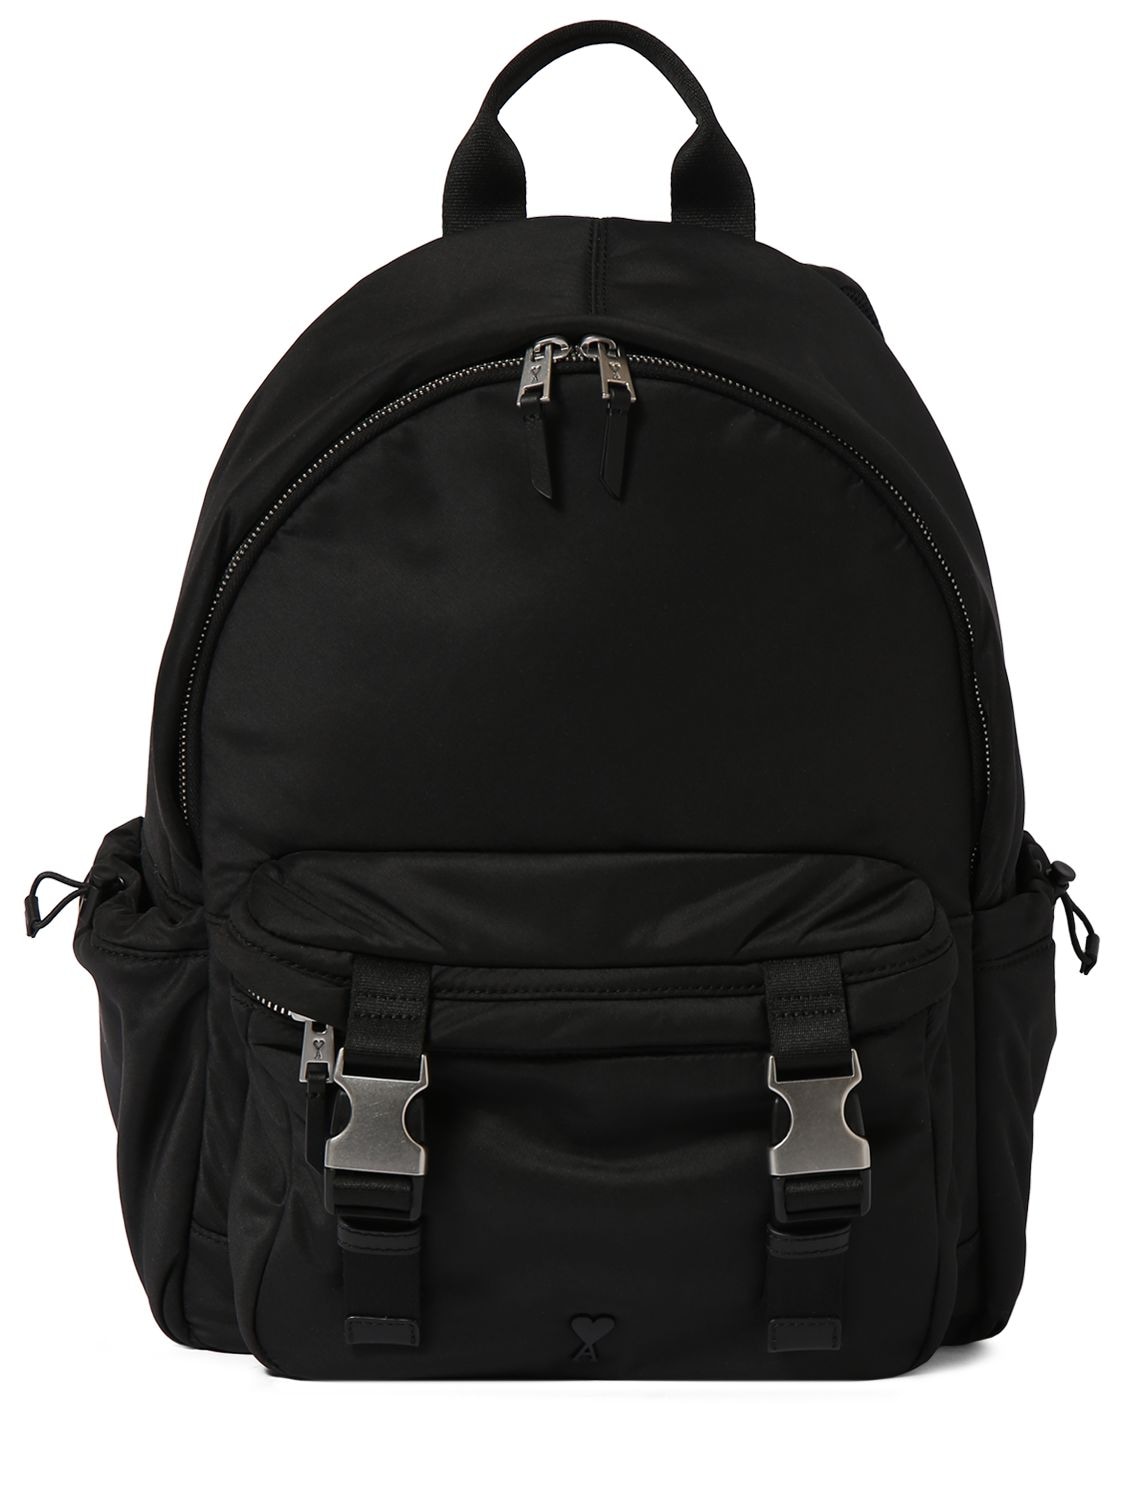 Image of Adc Zipped Bomber Backpack